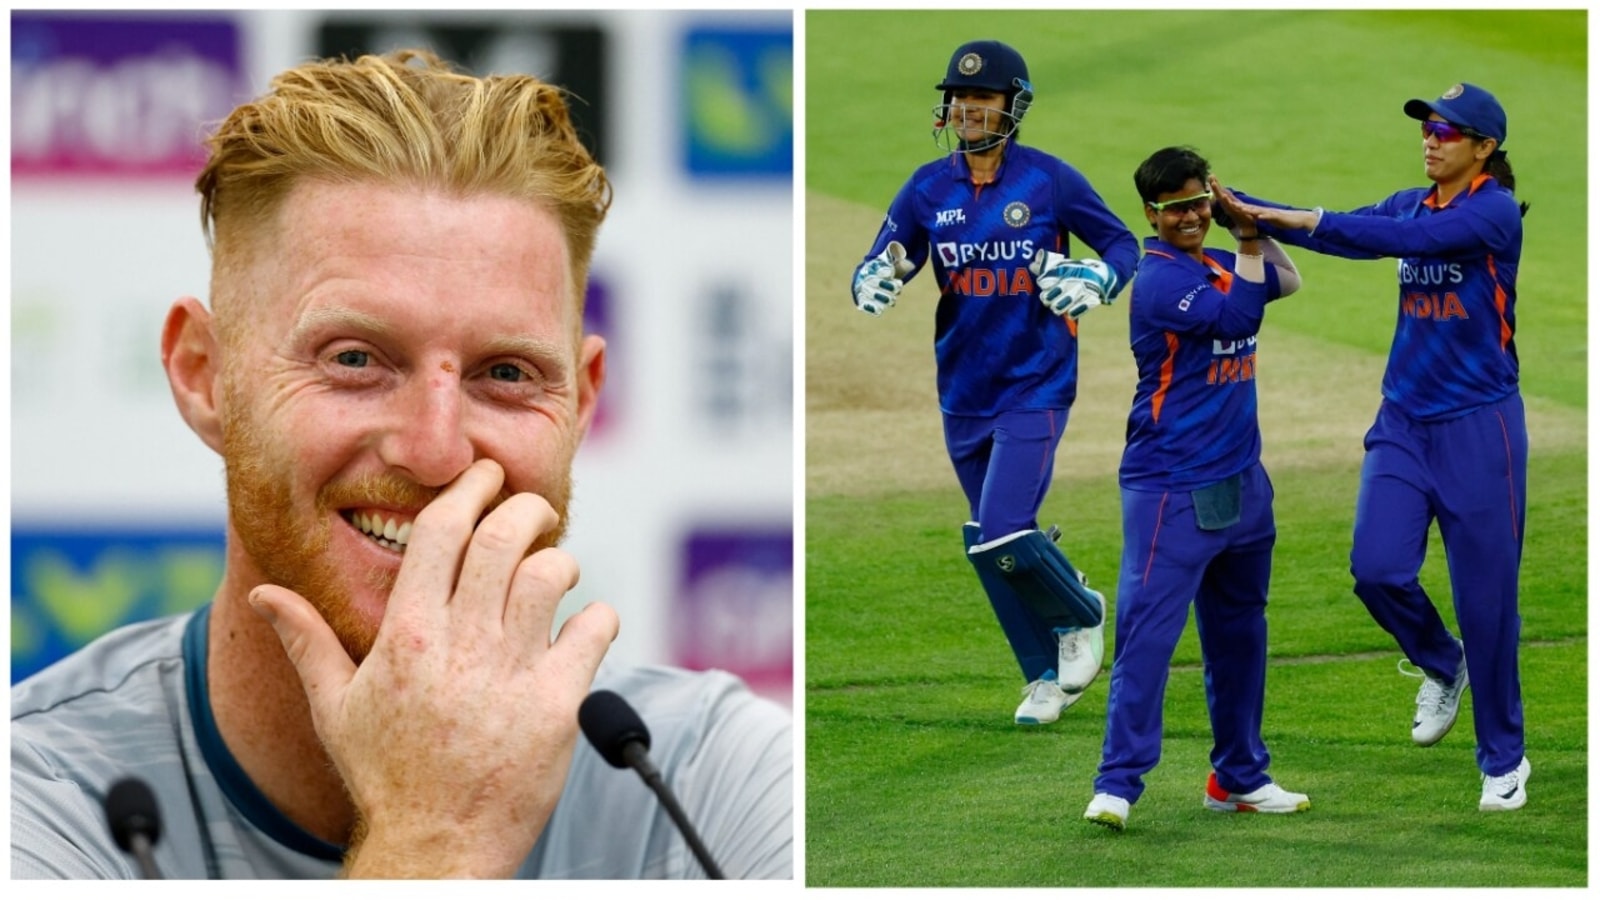 ben-stokes-drops-epic-reaction-after-charlie-dean-s-run-out-by-deepti-sharma-sparks-spirit-of-cricket-debate